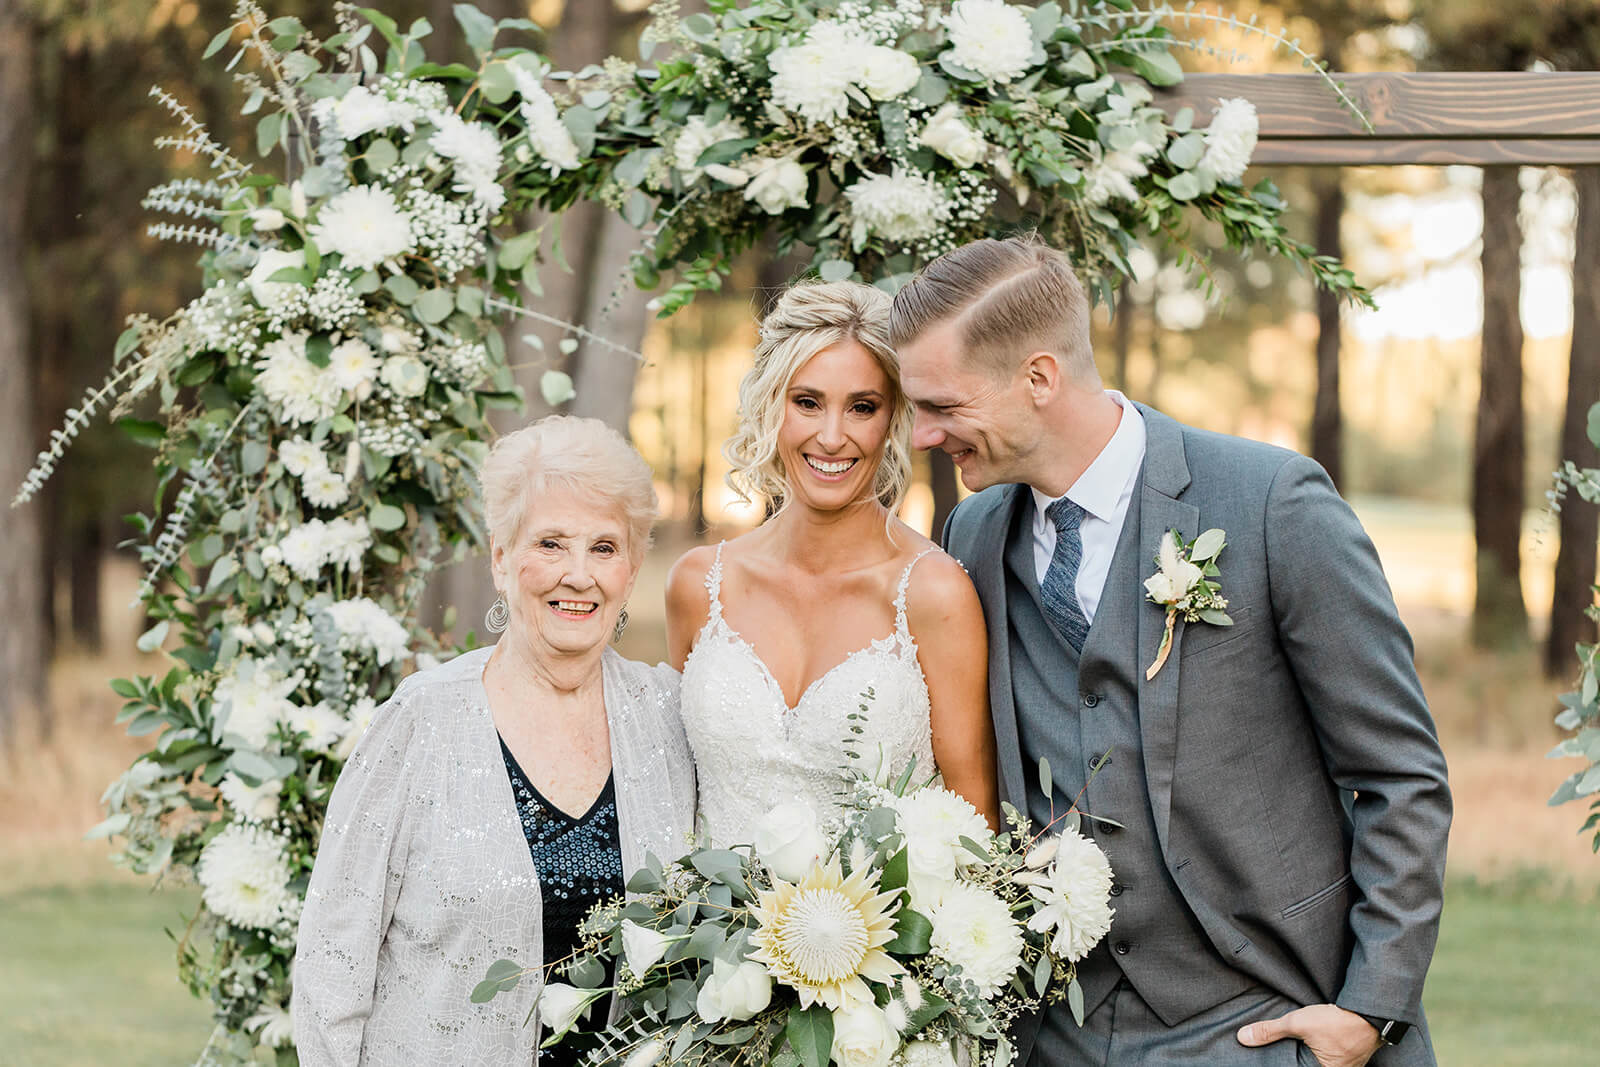 Tips for Family Photos on Your Wedding Day bride and groom with grandma on wedding day for family photos all laughing together